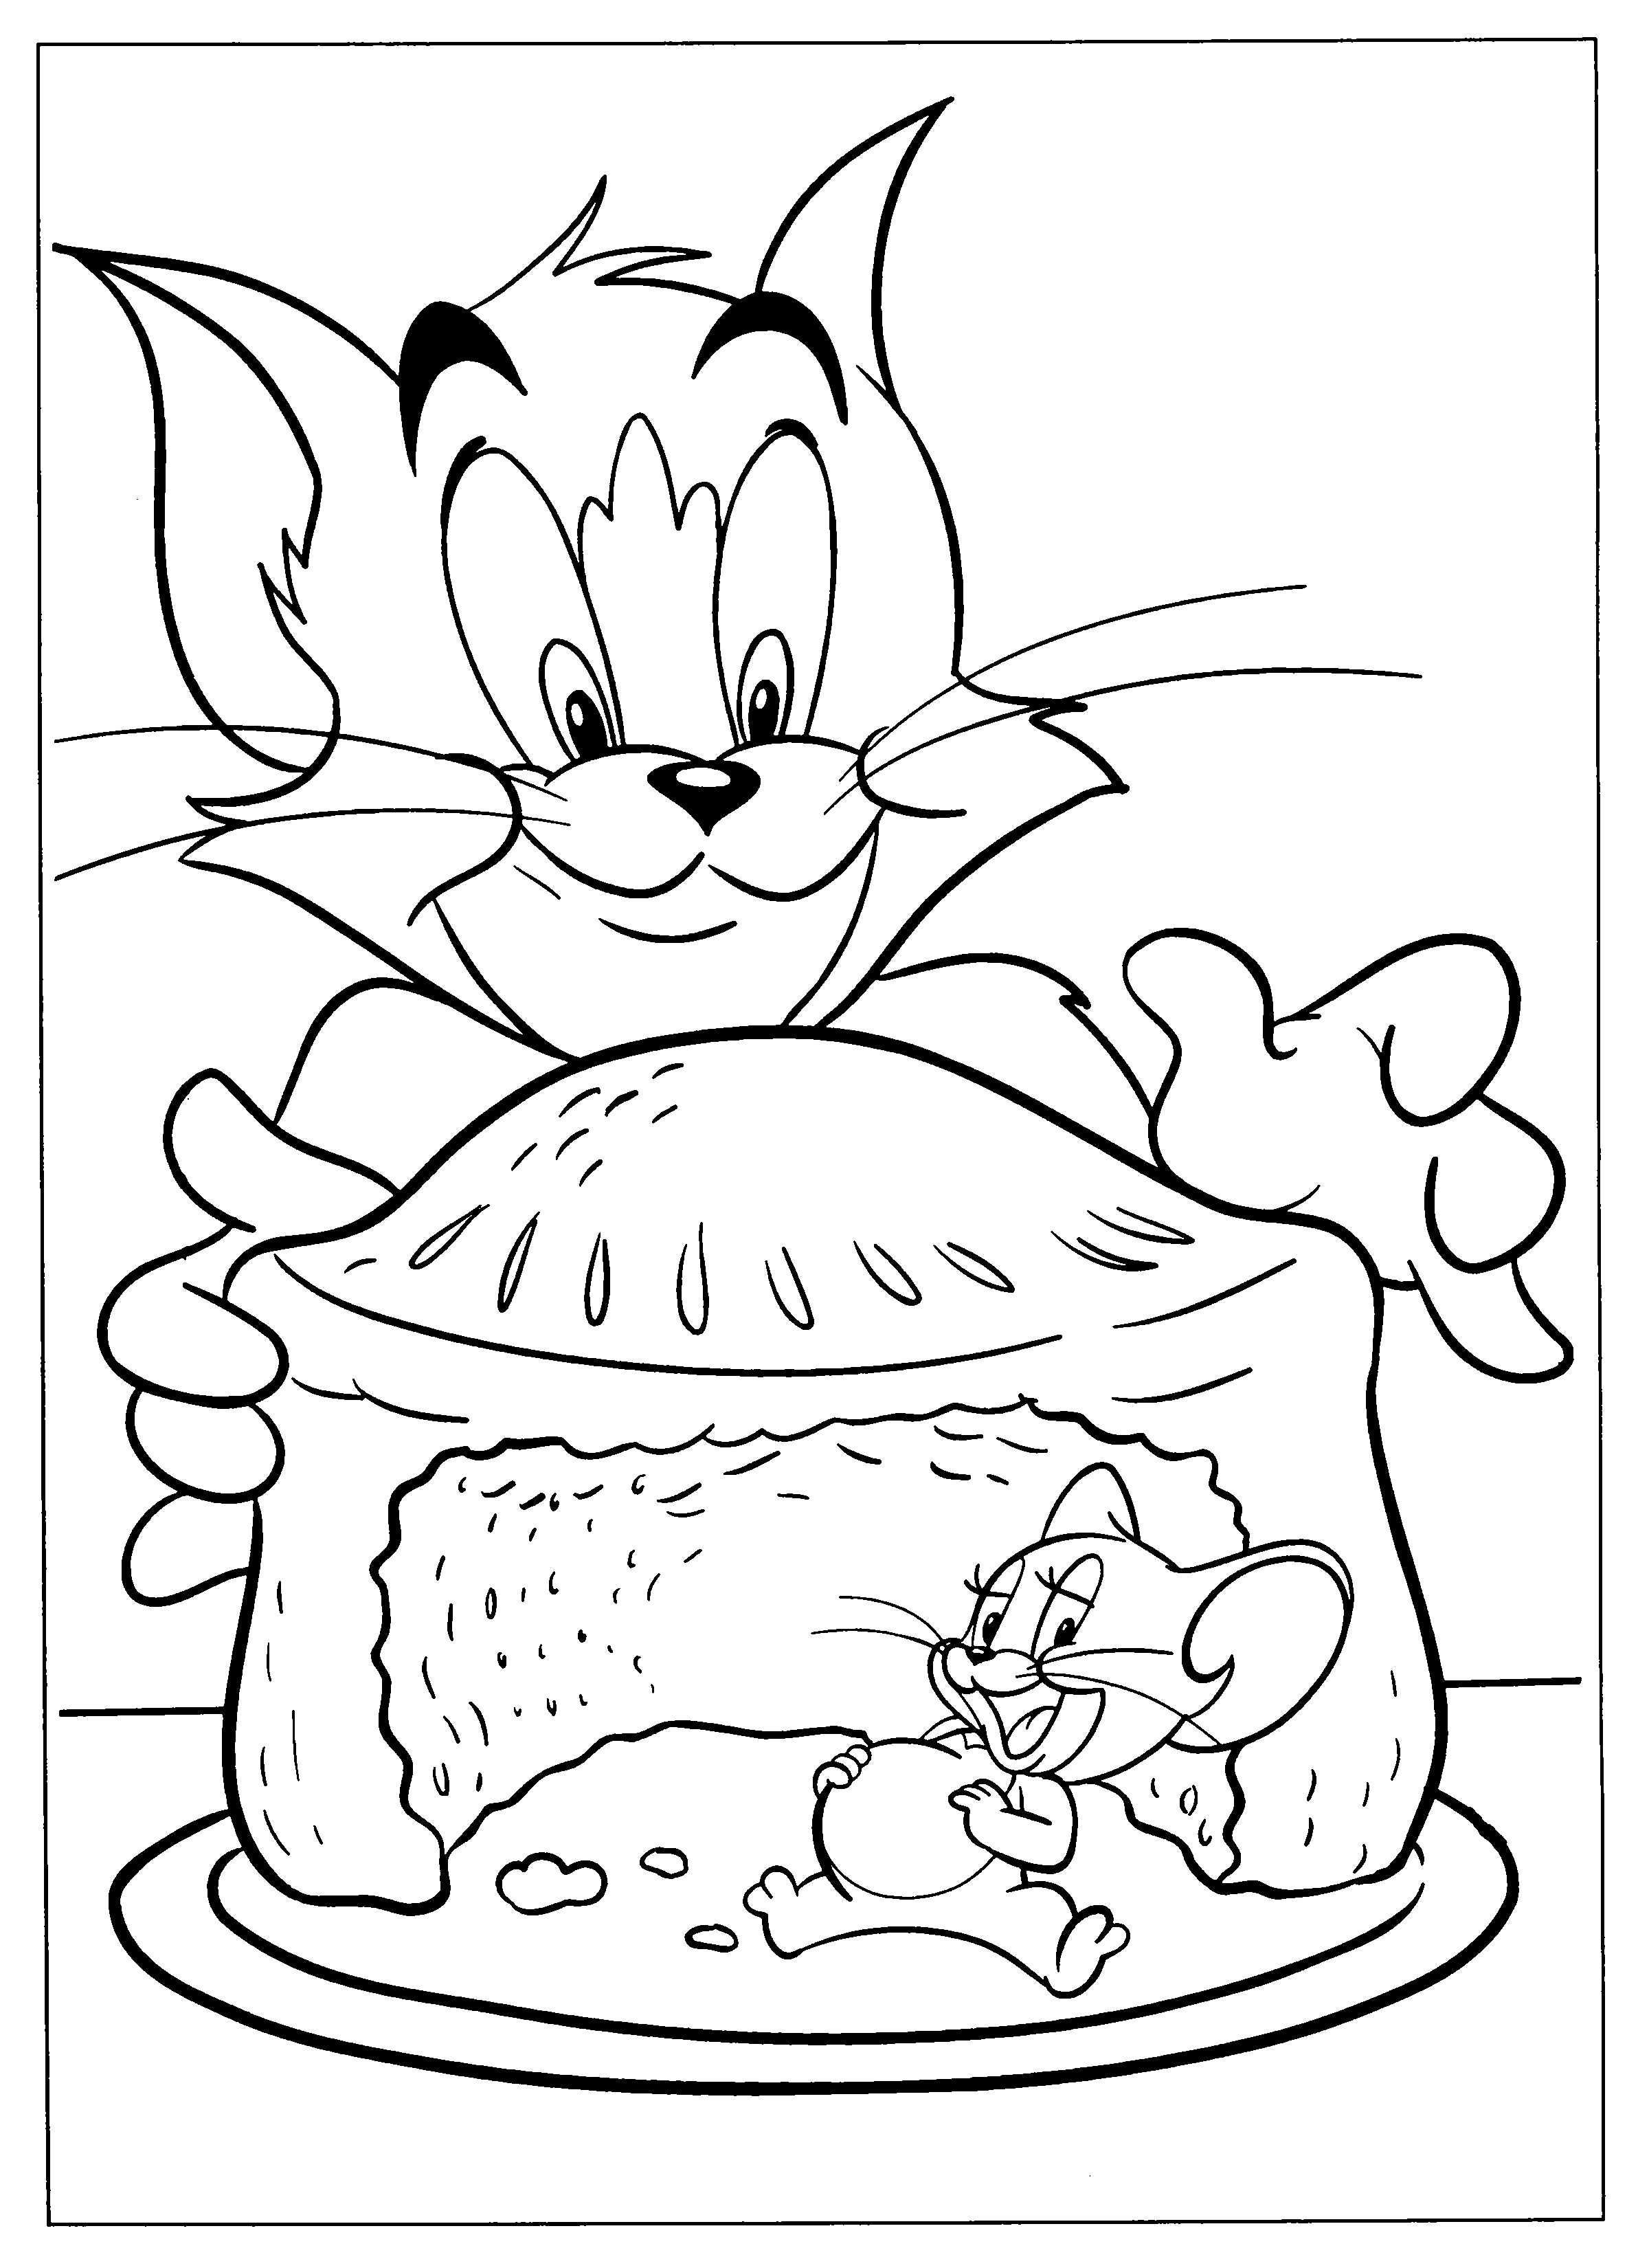 Print Out Tom And Jerry Coloring Page 1